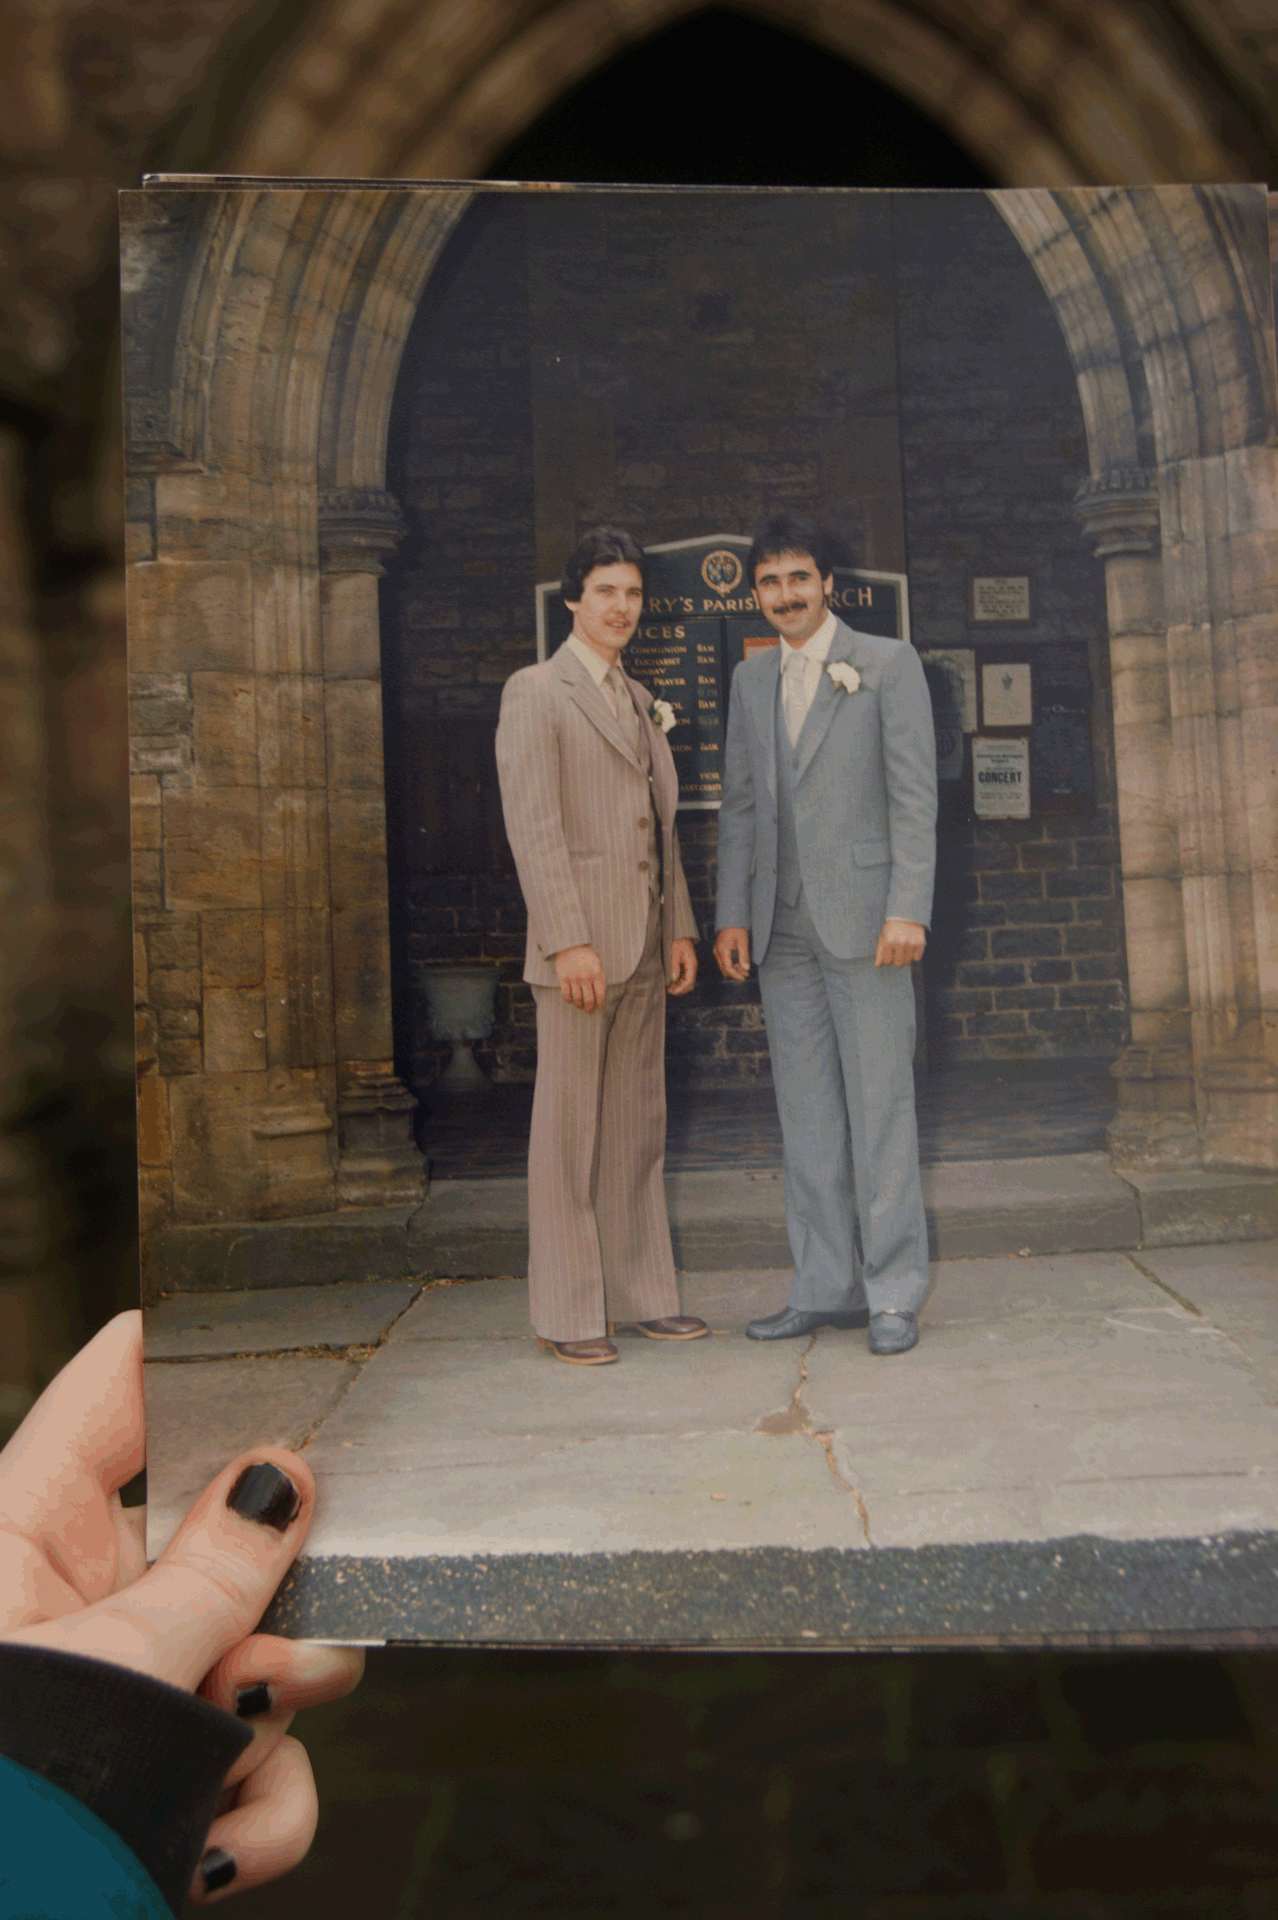 Dear Photograph,
My father and his brother stood there full of smiles in 1982 on the day he married my mother. Unfortunately, a lot has changed since then&#8230;love included.
Bethan